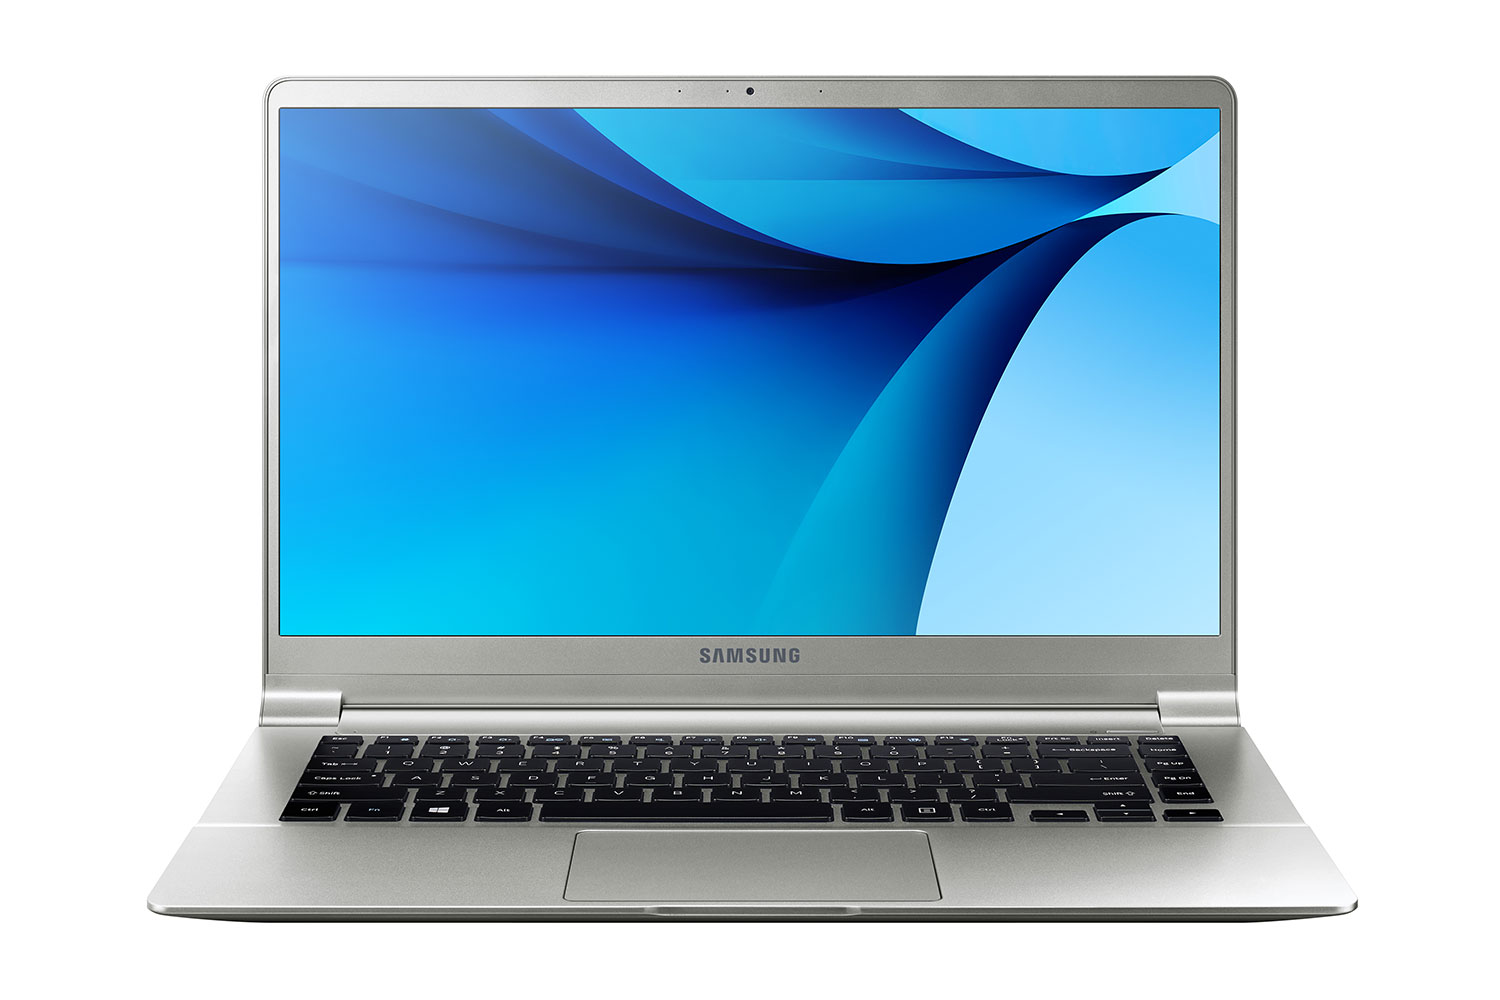 samsung debuts new galaxy tabpro s 2 in 1 book 9 laptops at ces 2016 15 24